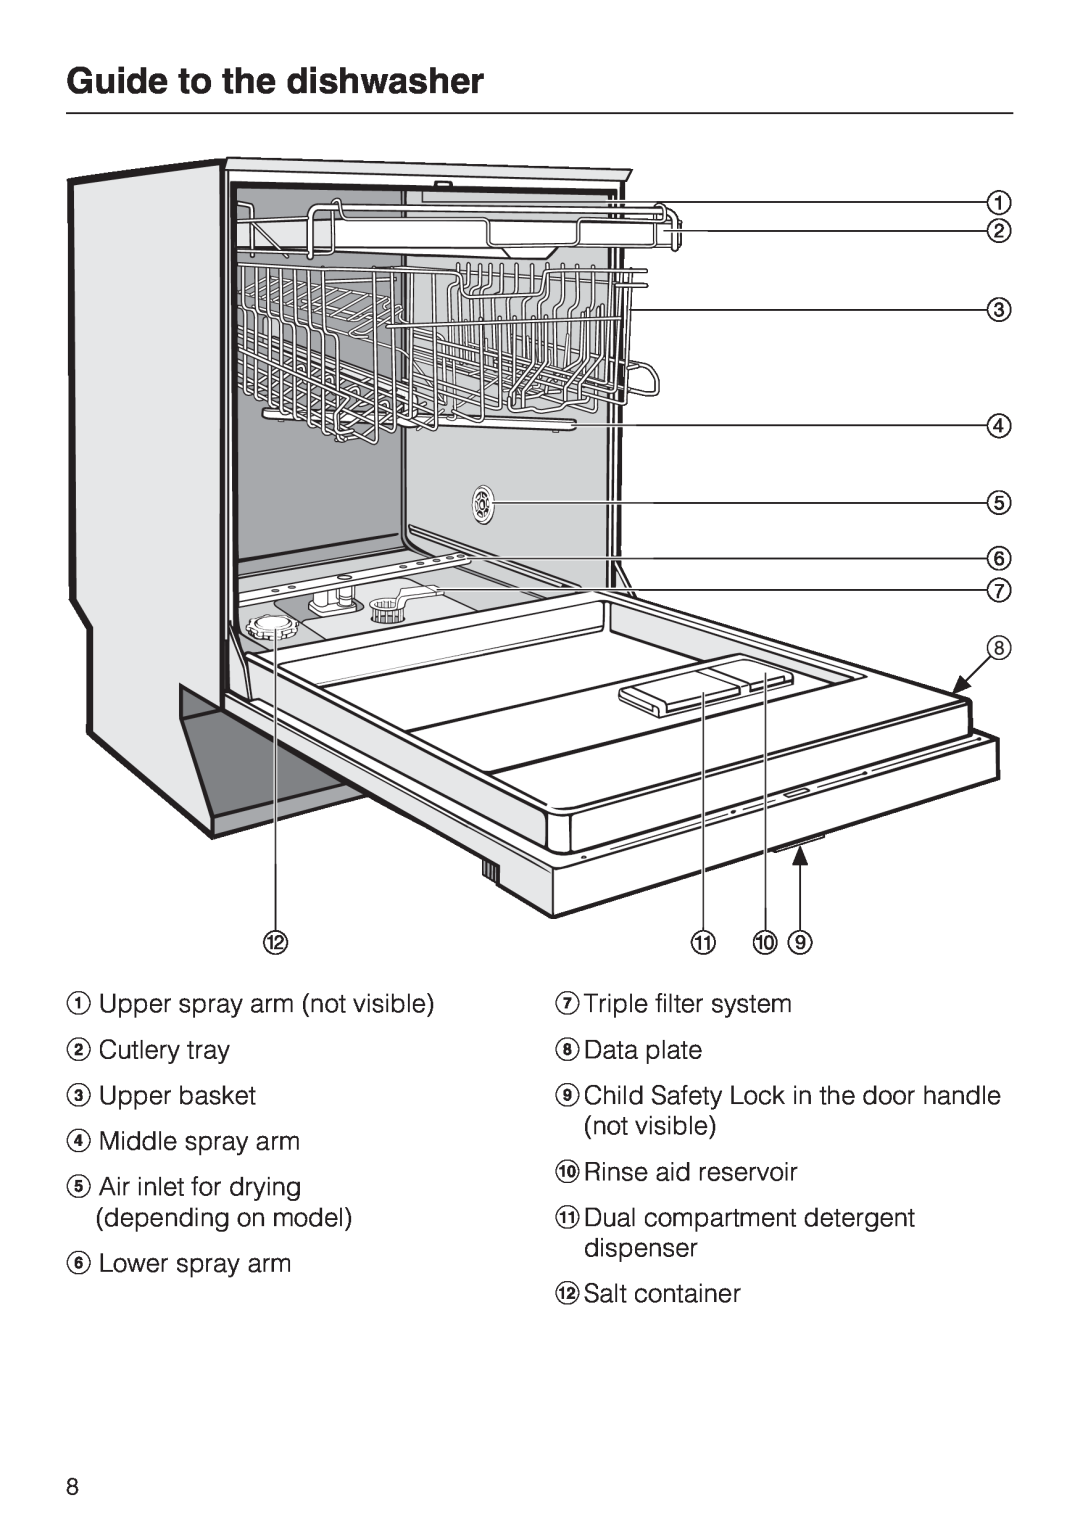 Miele G 5705, G 5700 Guide to the dishwasher, Upper spray arm not visible Cutlery tray, Upper basket Middle spray arm 